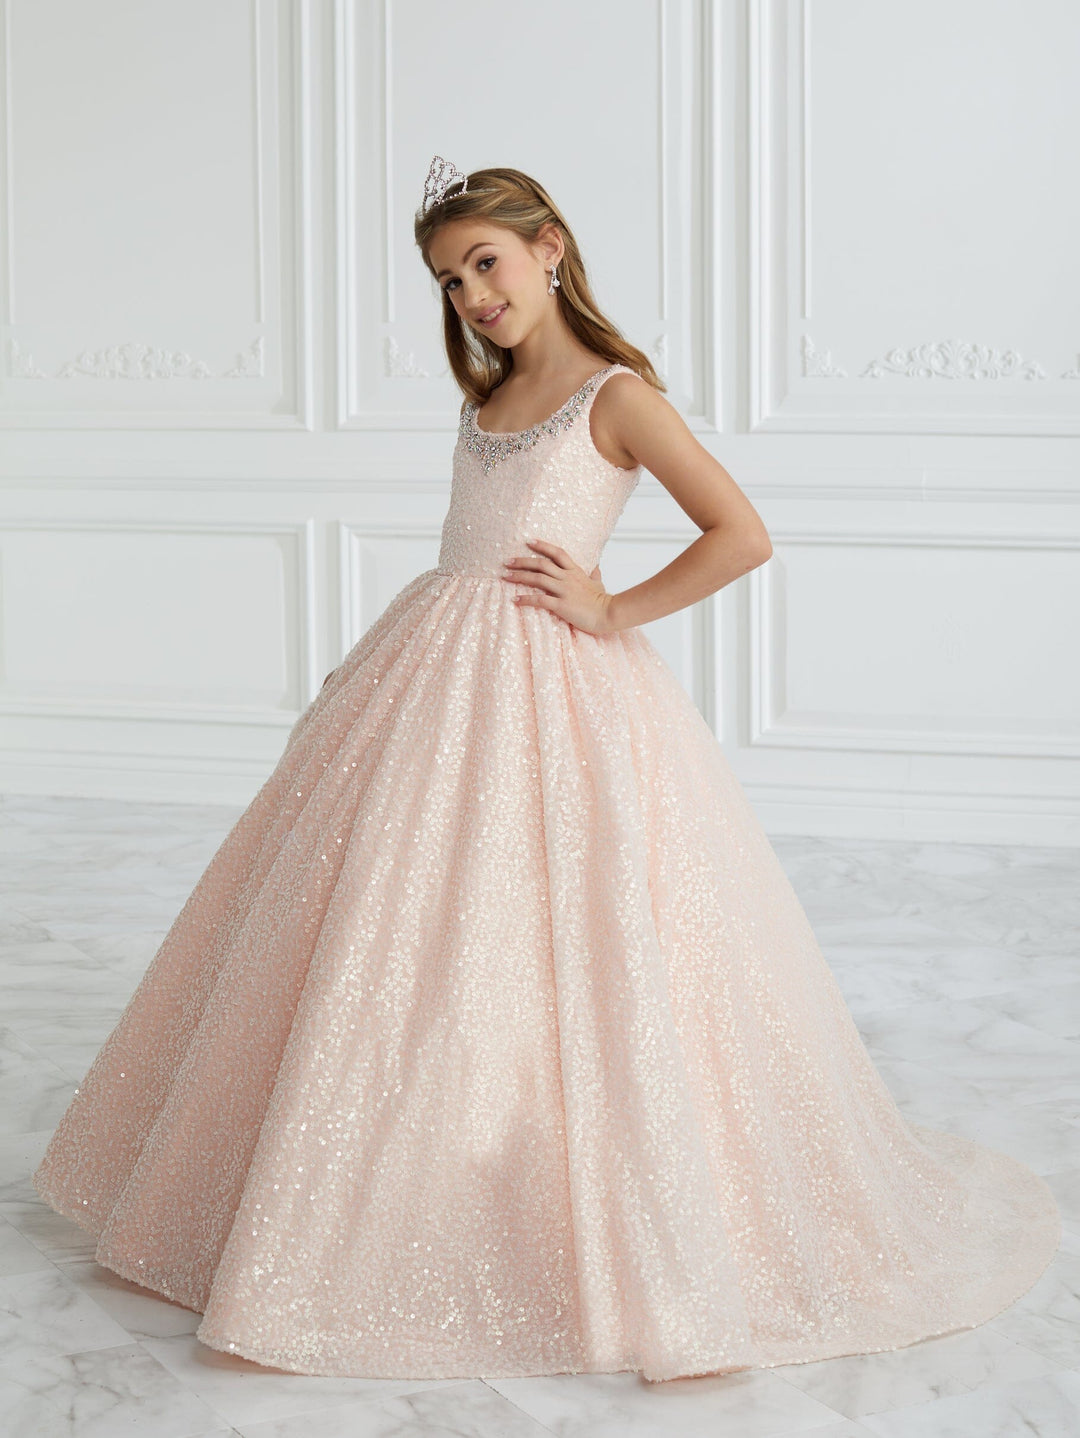 Girls Sequin Sleeveless Gown by Tiffany Princess 13683